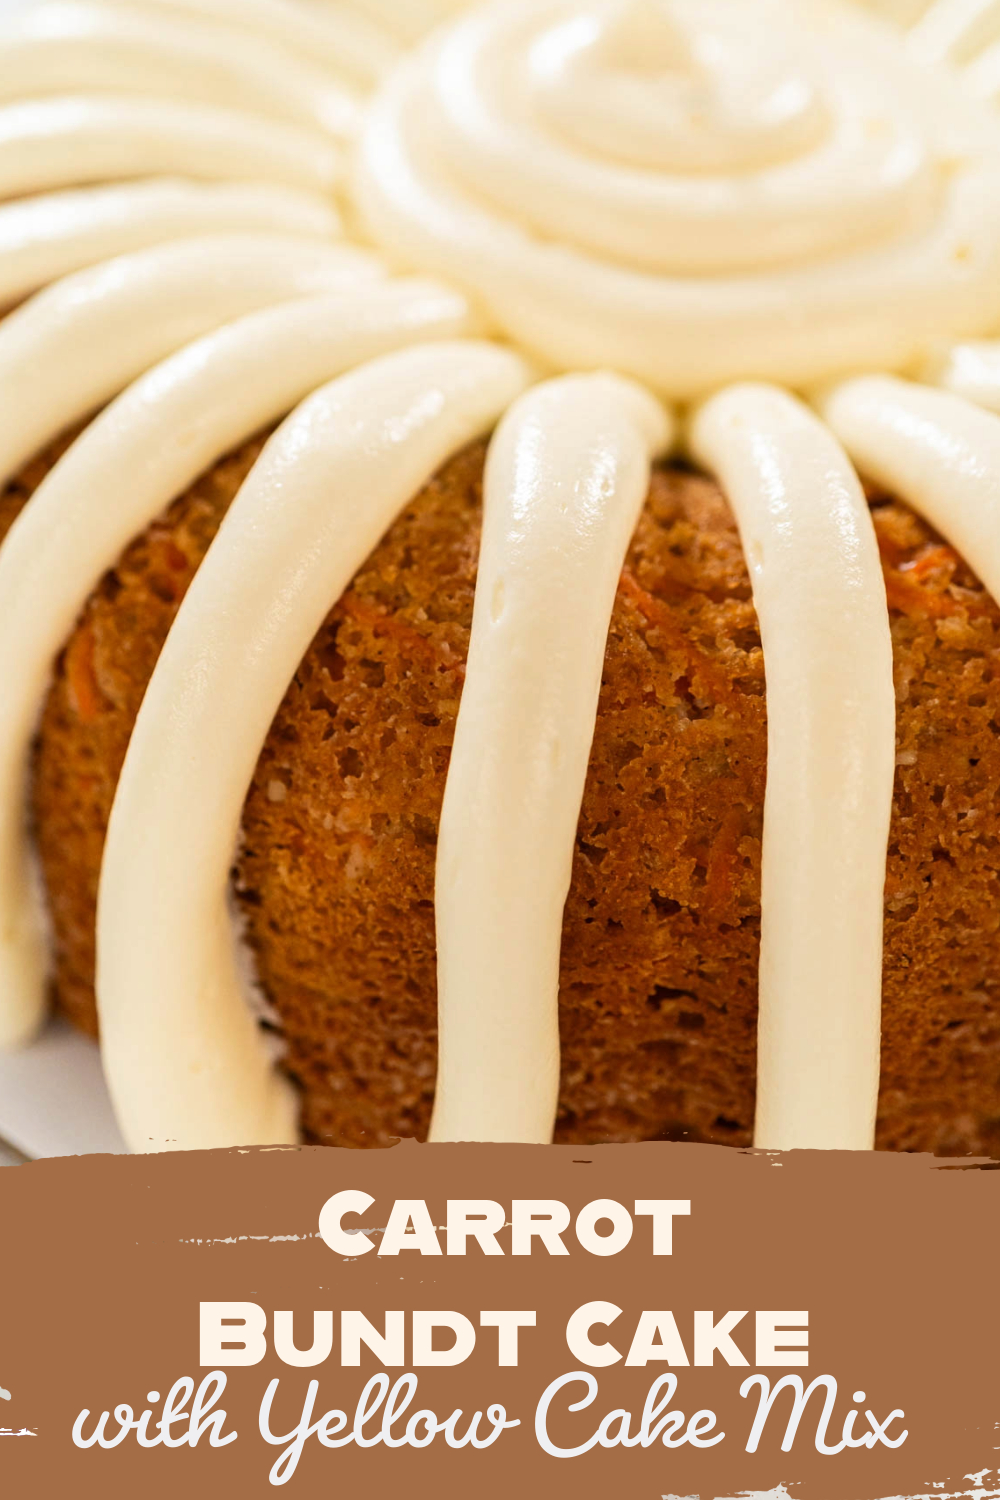 Carrot Bundt Cake From Cake Mix